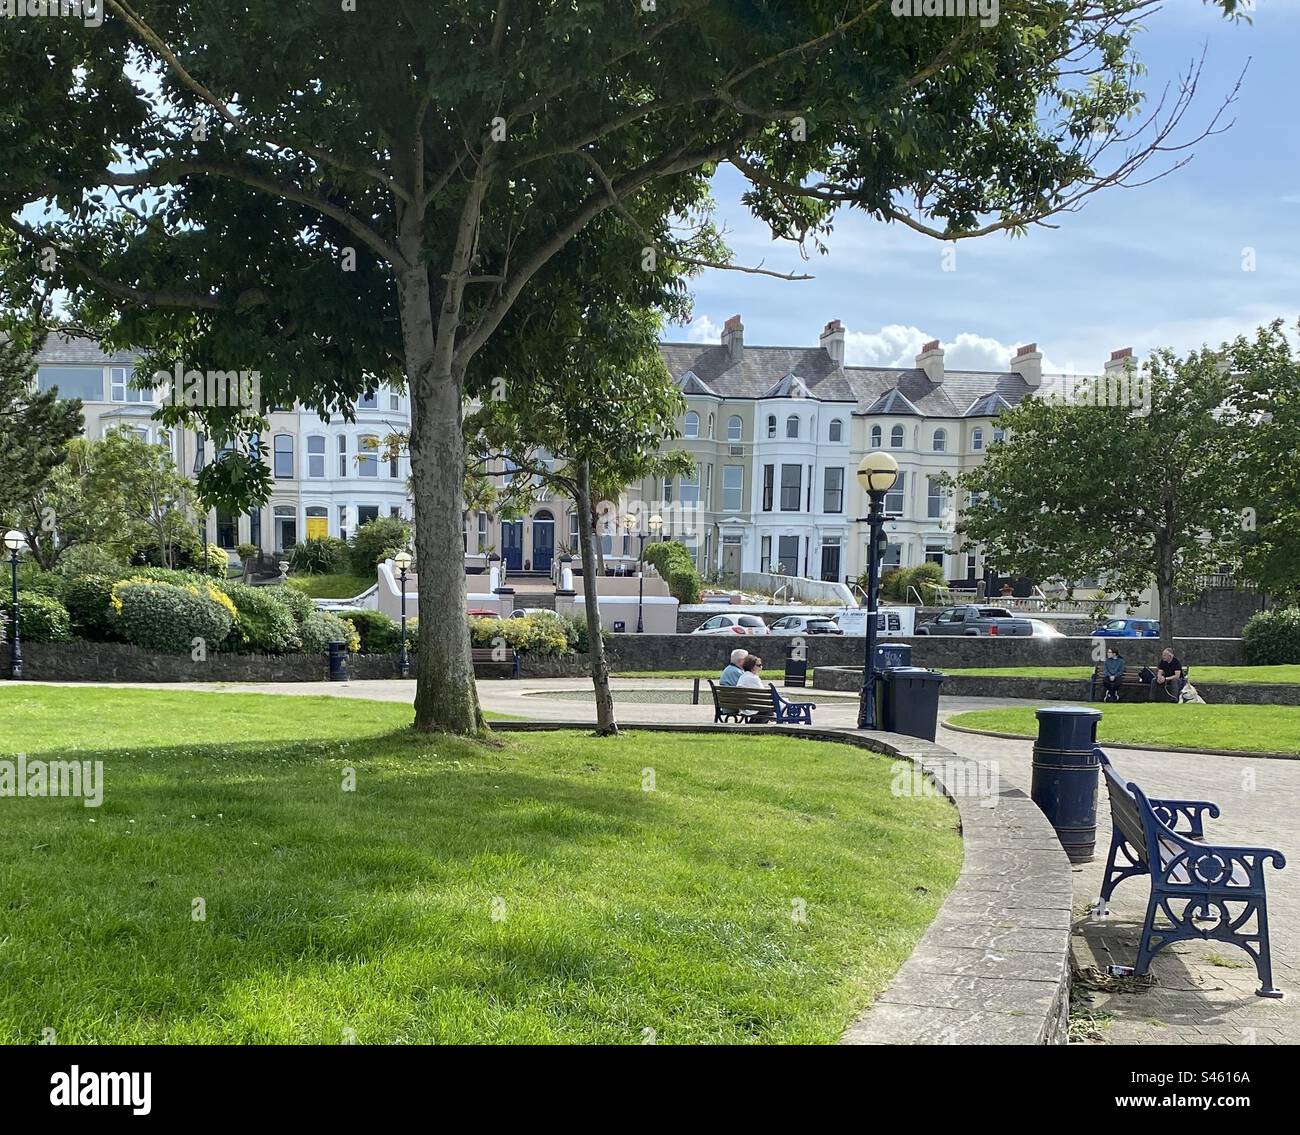 Peaceful scene on Queen’s Parade, Bangor, Northern Ireland, near the boating marina. Historic 19th century buildings overlook the seafront and are being re-developed to display their elegant features. Stock Photo